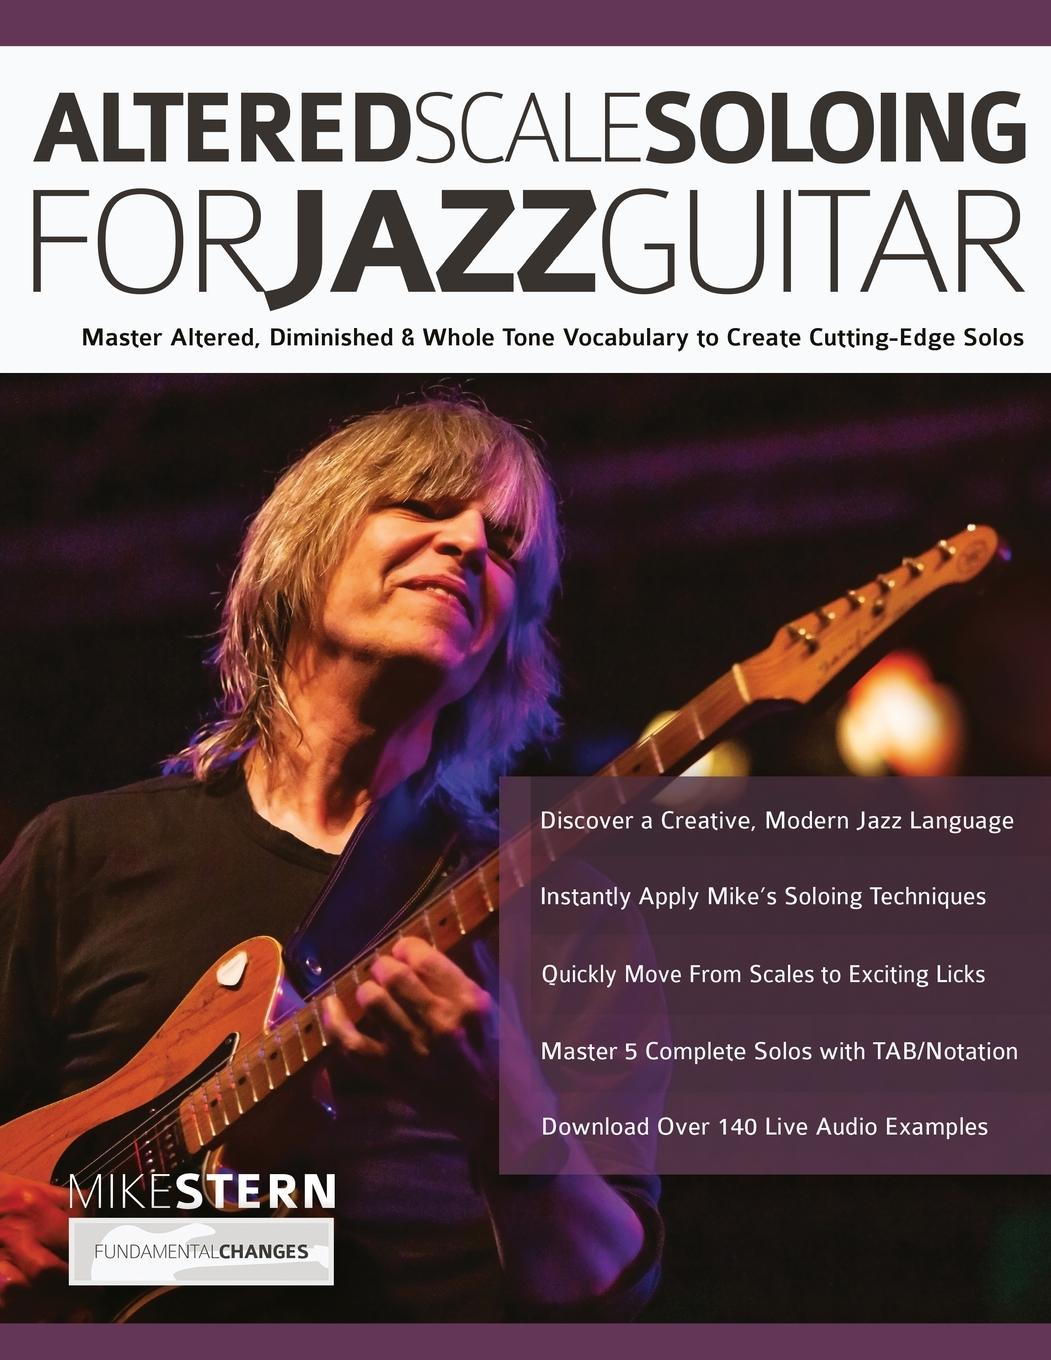 Book Mike Stern Altered Scale Soloing Tim Pettingale